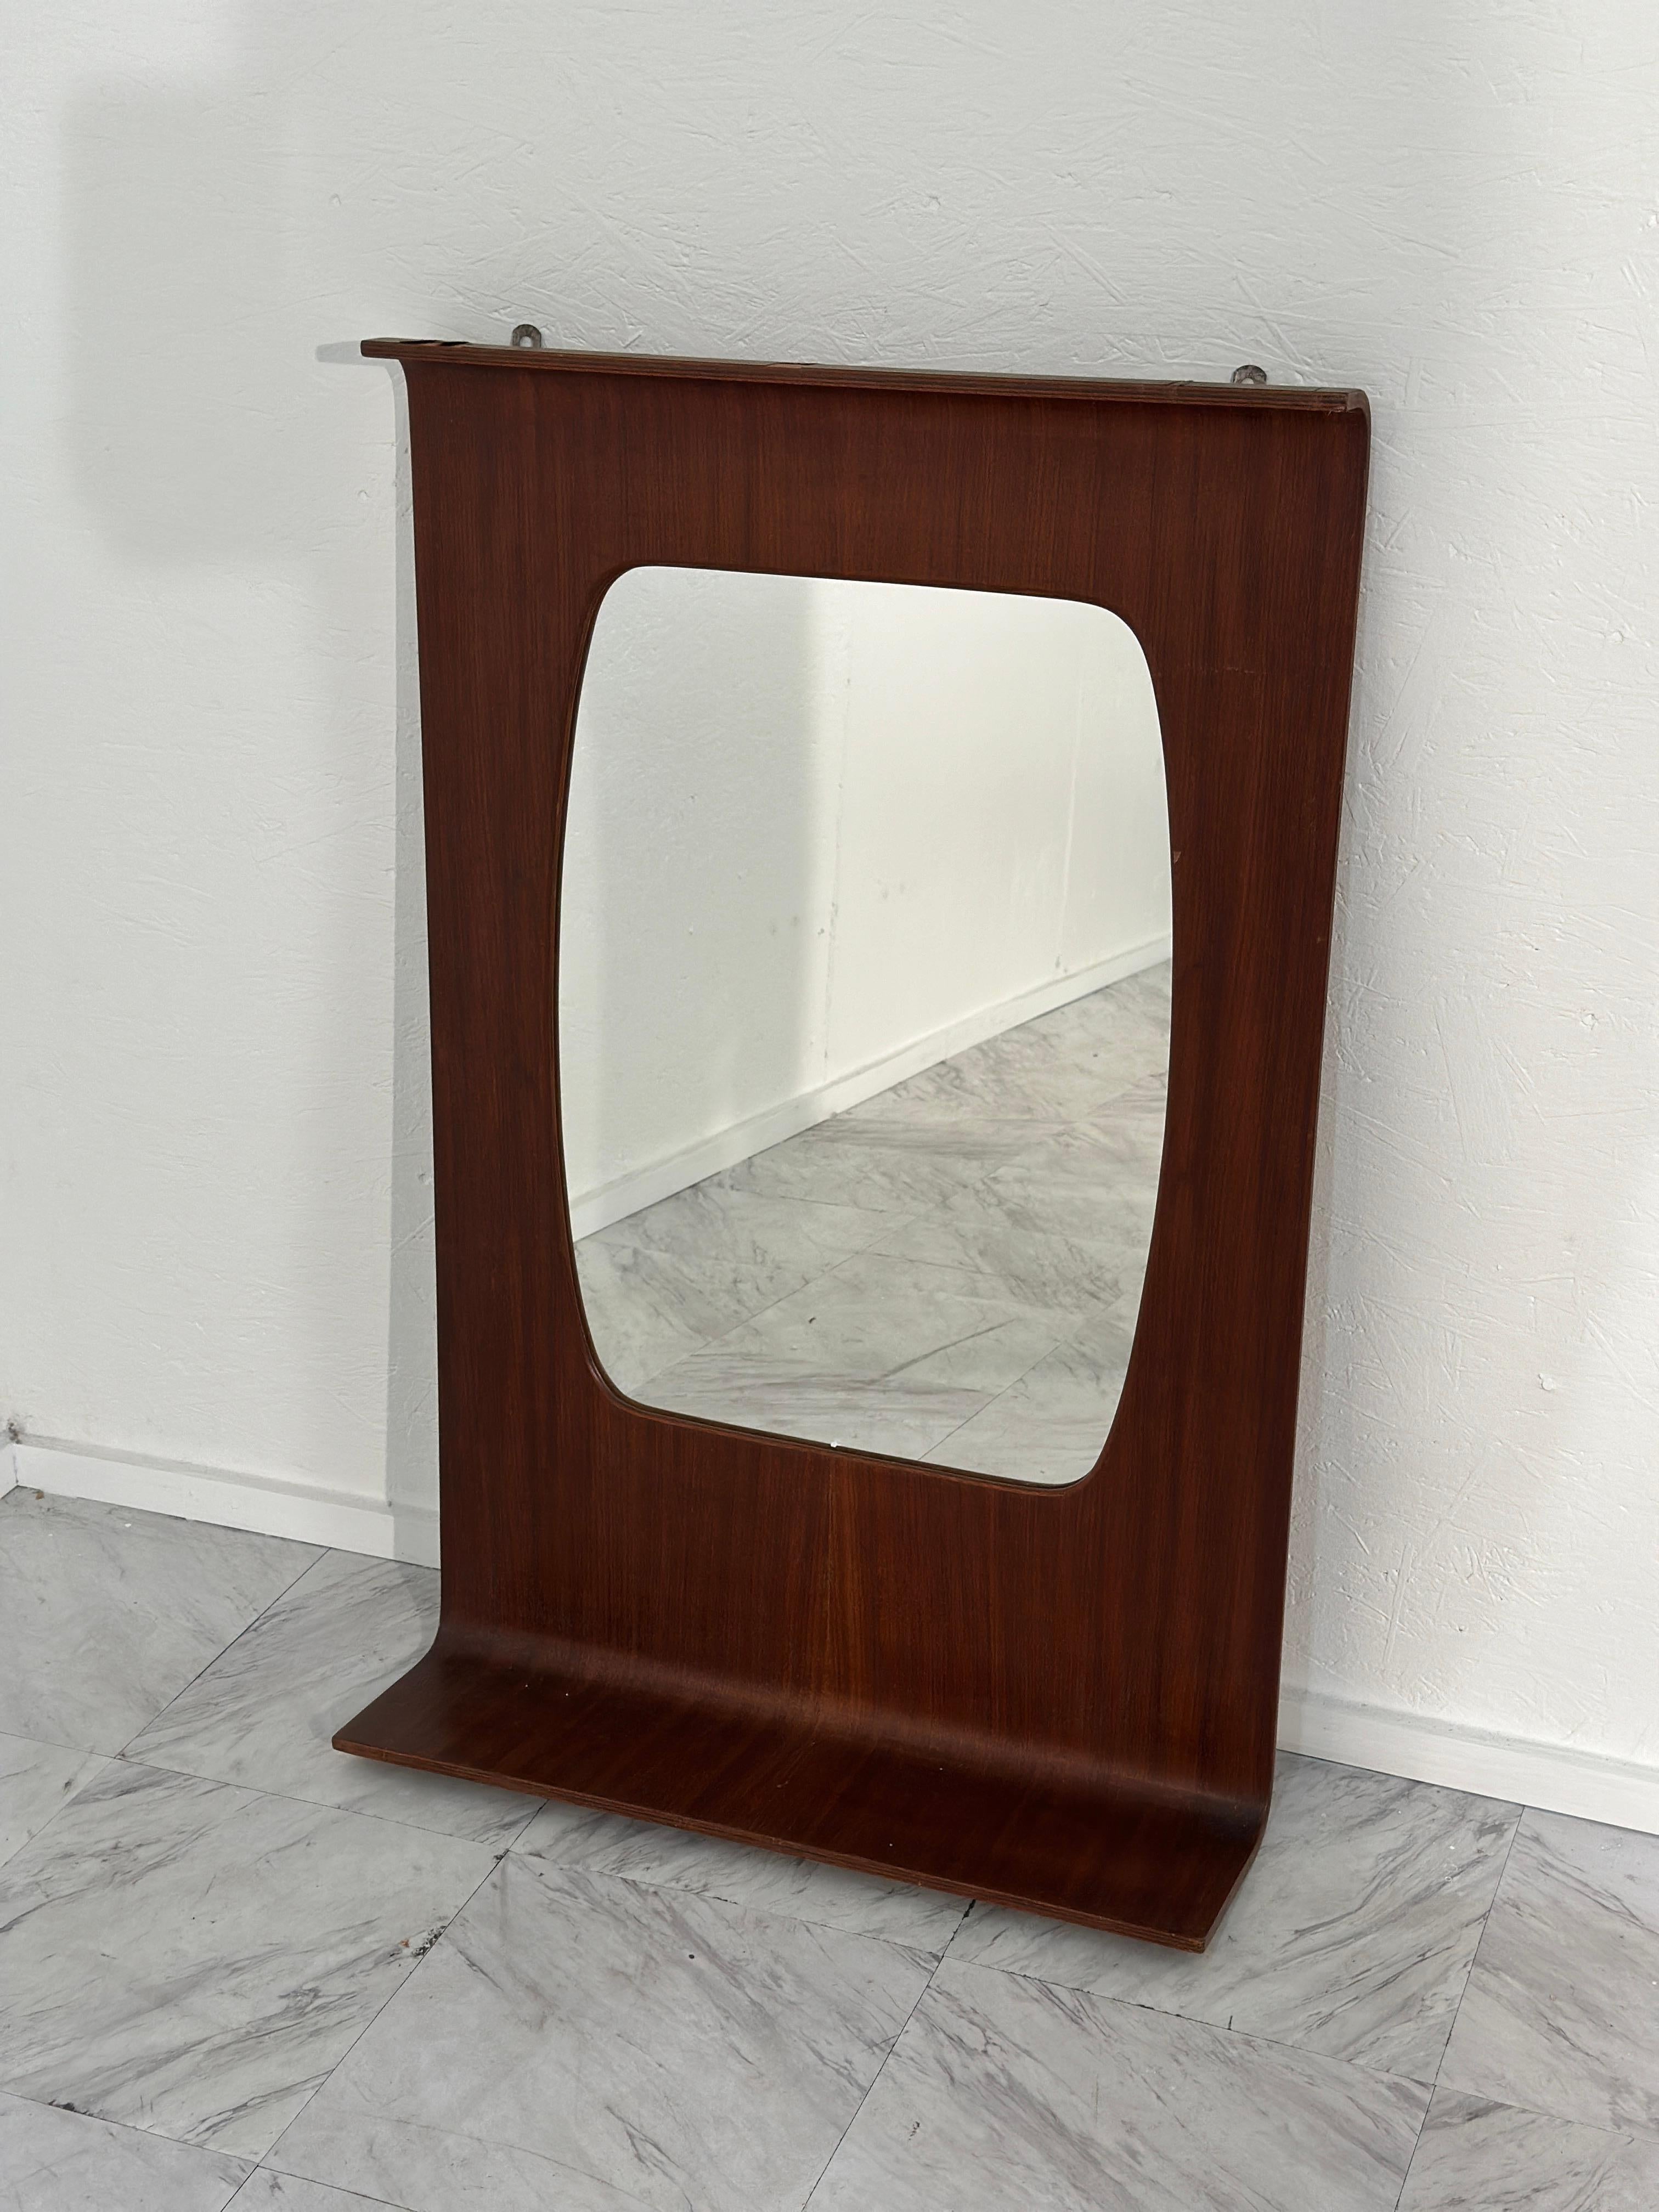 This Vintage Italian Rosewood Veneer Plywood Mirror from the 1960s exudes timeless elegance and Italian craftsmanship. The rosewood veneer plywood frame adds warmth and sophistication to any space, while the addition of a lower shelf provides both